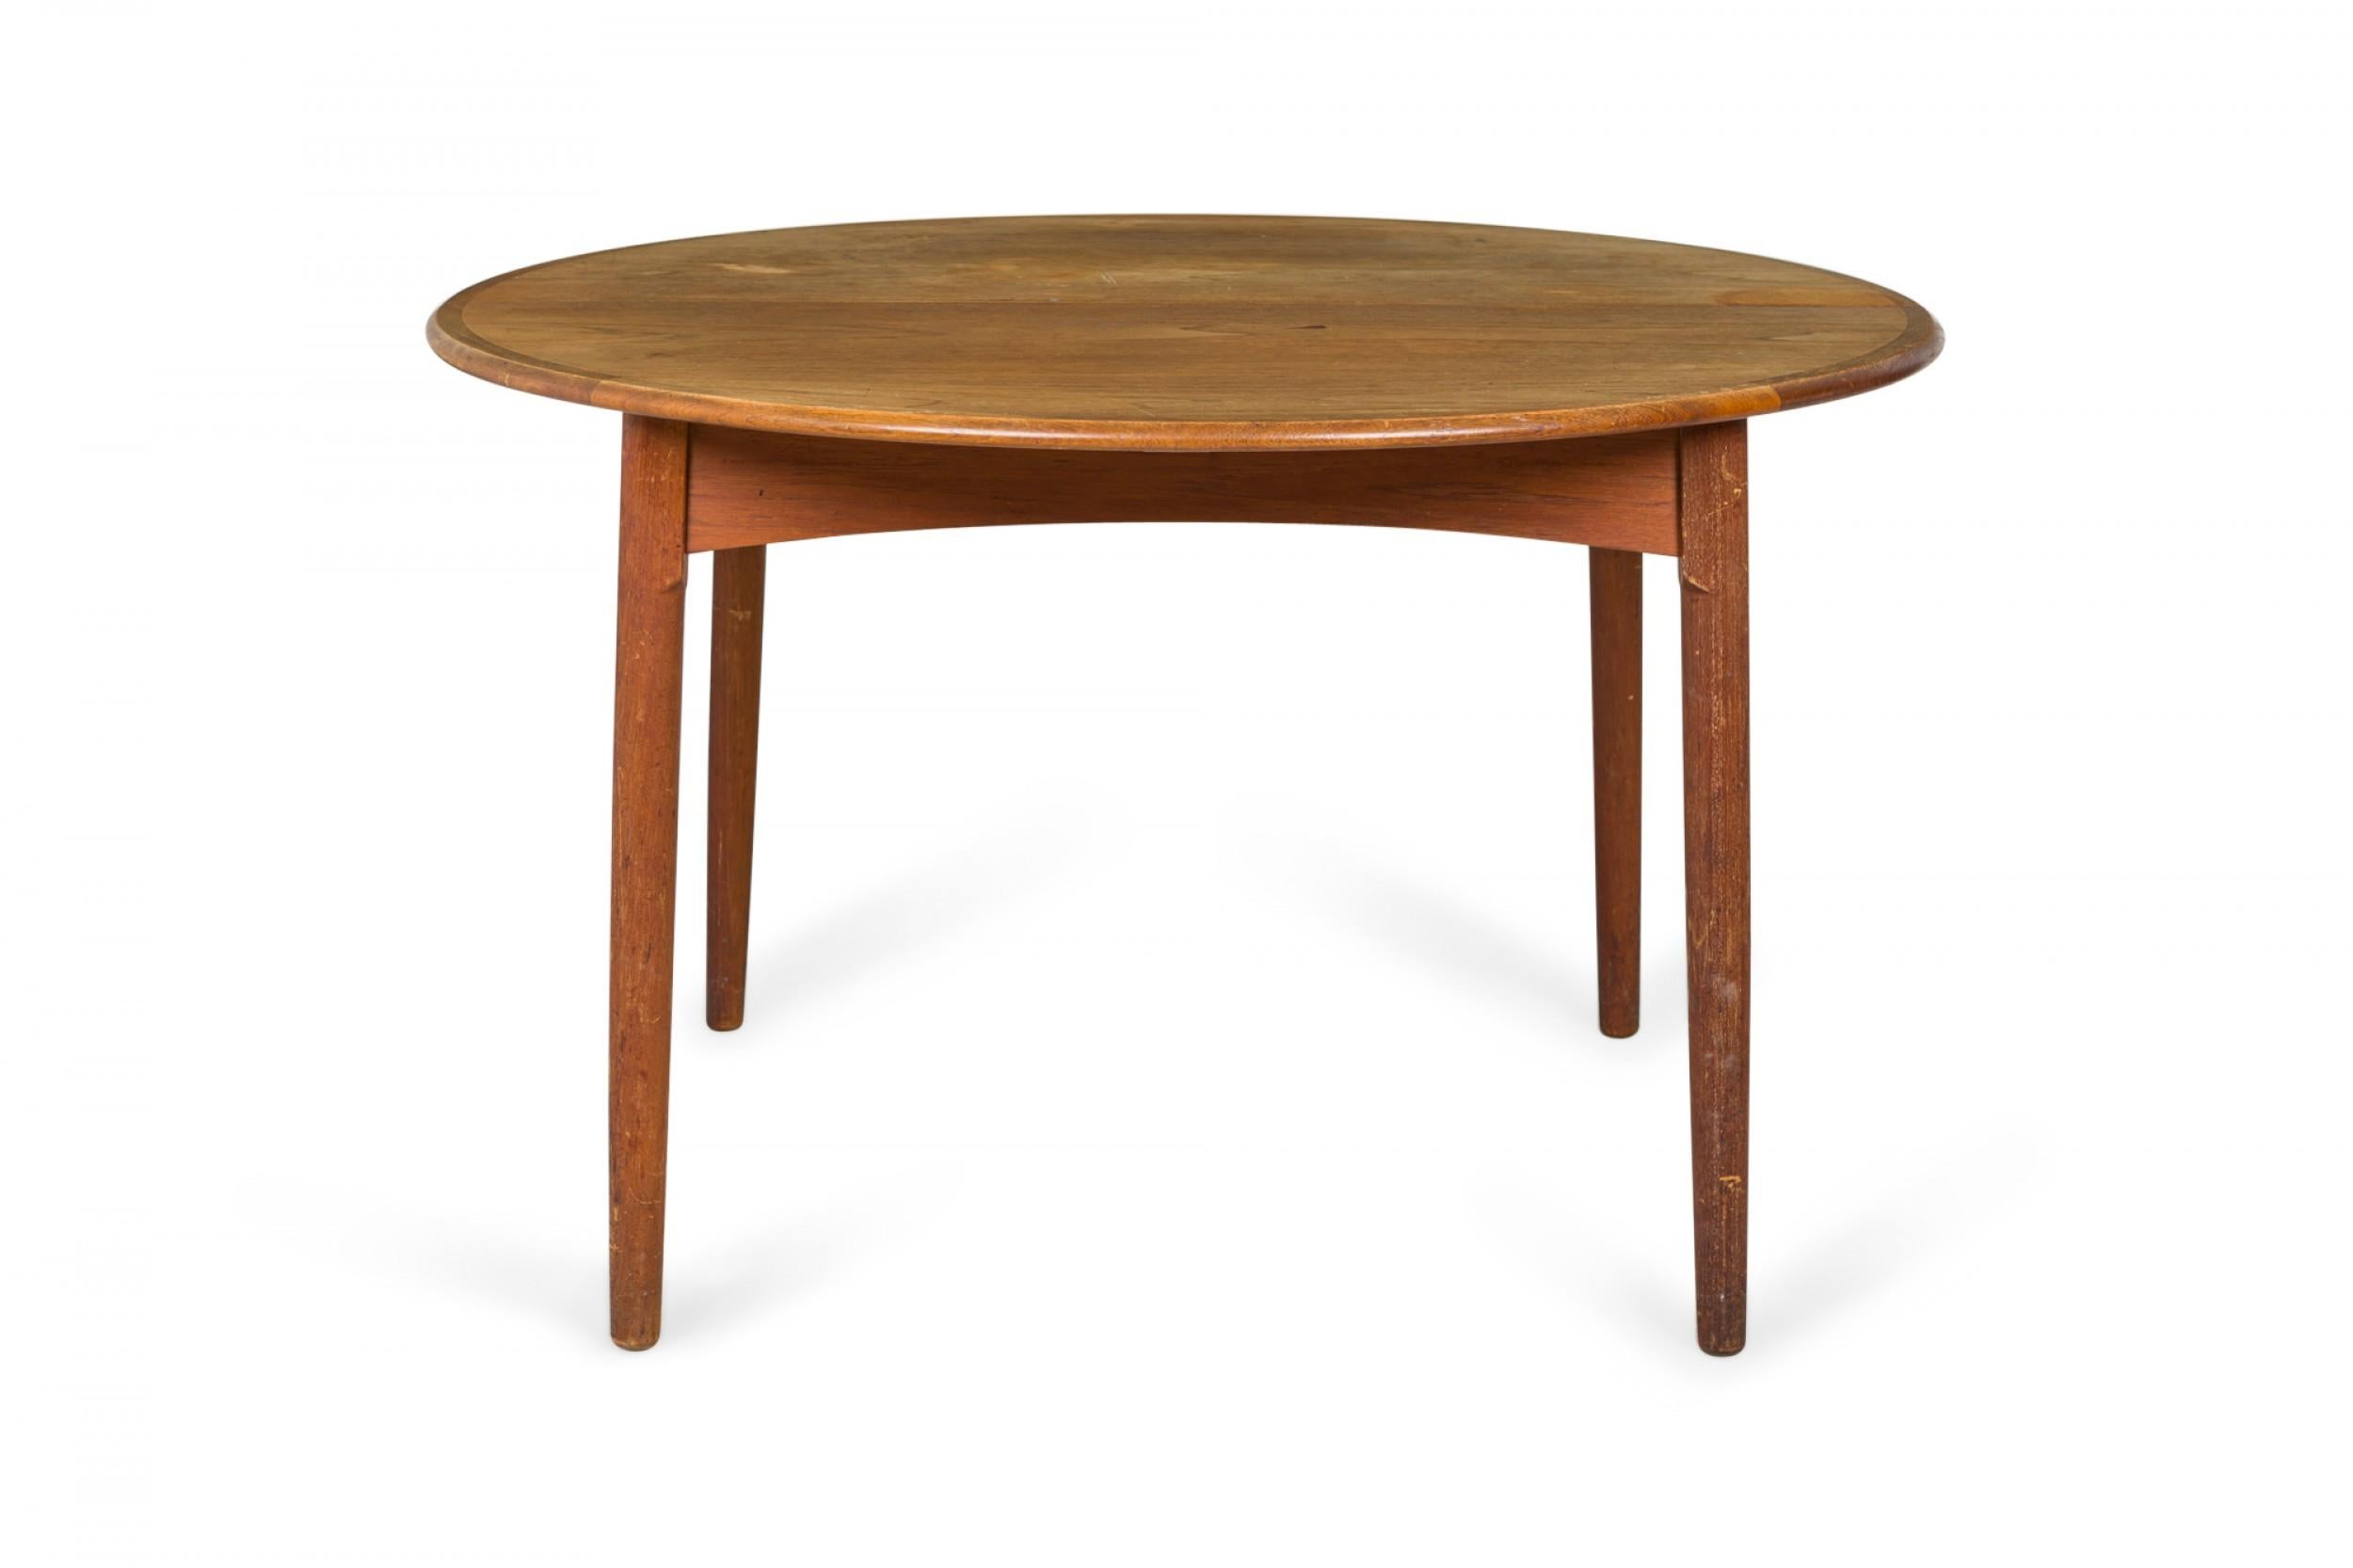 William Watting Danish Mid-Century Modern Teak Dining Table with Leaves In Good Condition For Sale In New York, NY